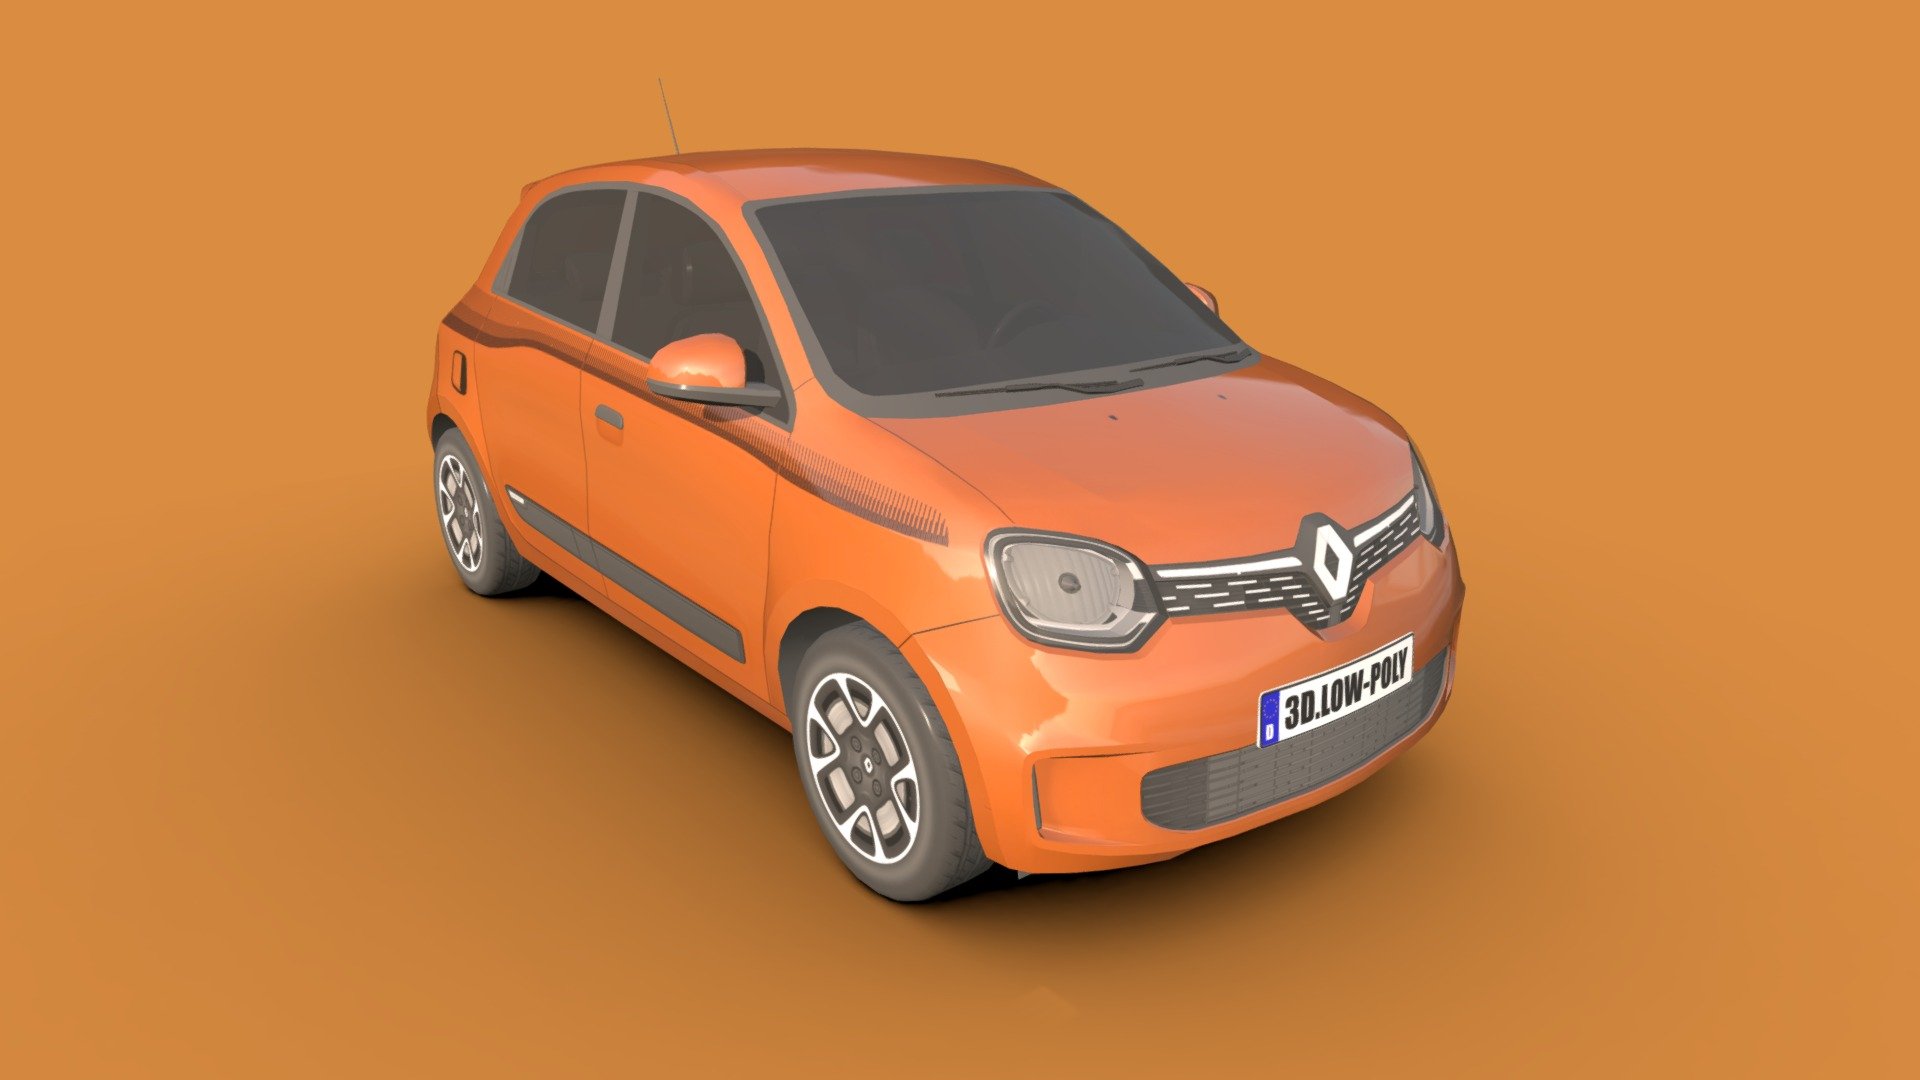 *Renault Twingo 2021

*You can use these models in any game and any project.

*The interior of these models is simply designed so that it is low poly and can be used for any game.

*This model is made with order and precision.

*Separated parts (body. Wheels).

*low poly

*Average poly count: 16,000 tris.

Texture size: 4096 * 4096(BMP)_2048 * 2048(bmp).

*High quality texture

*Thanks 3d model